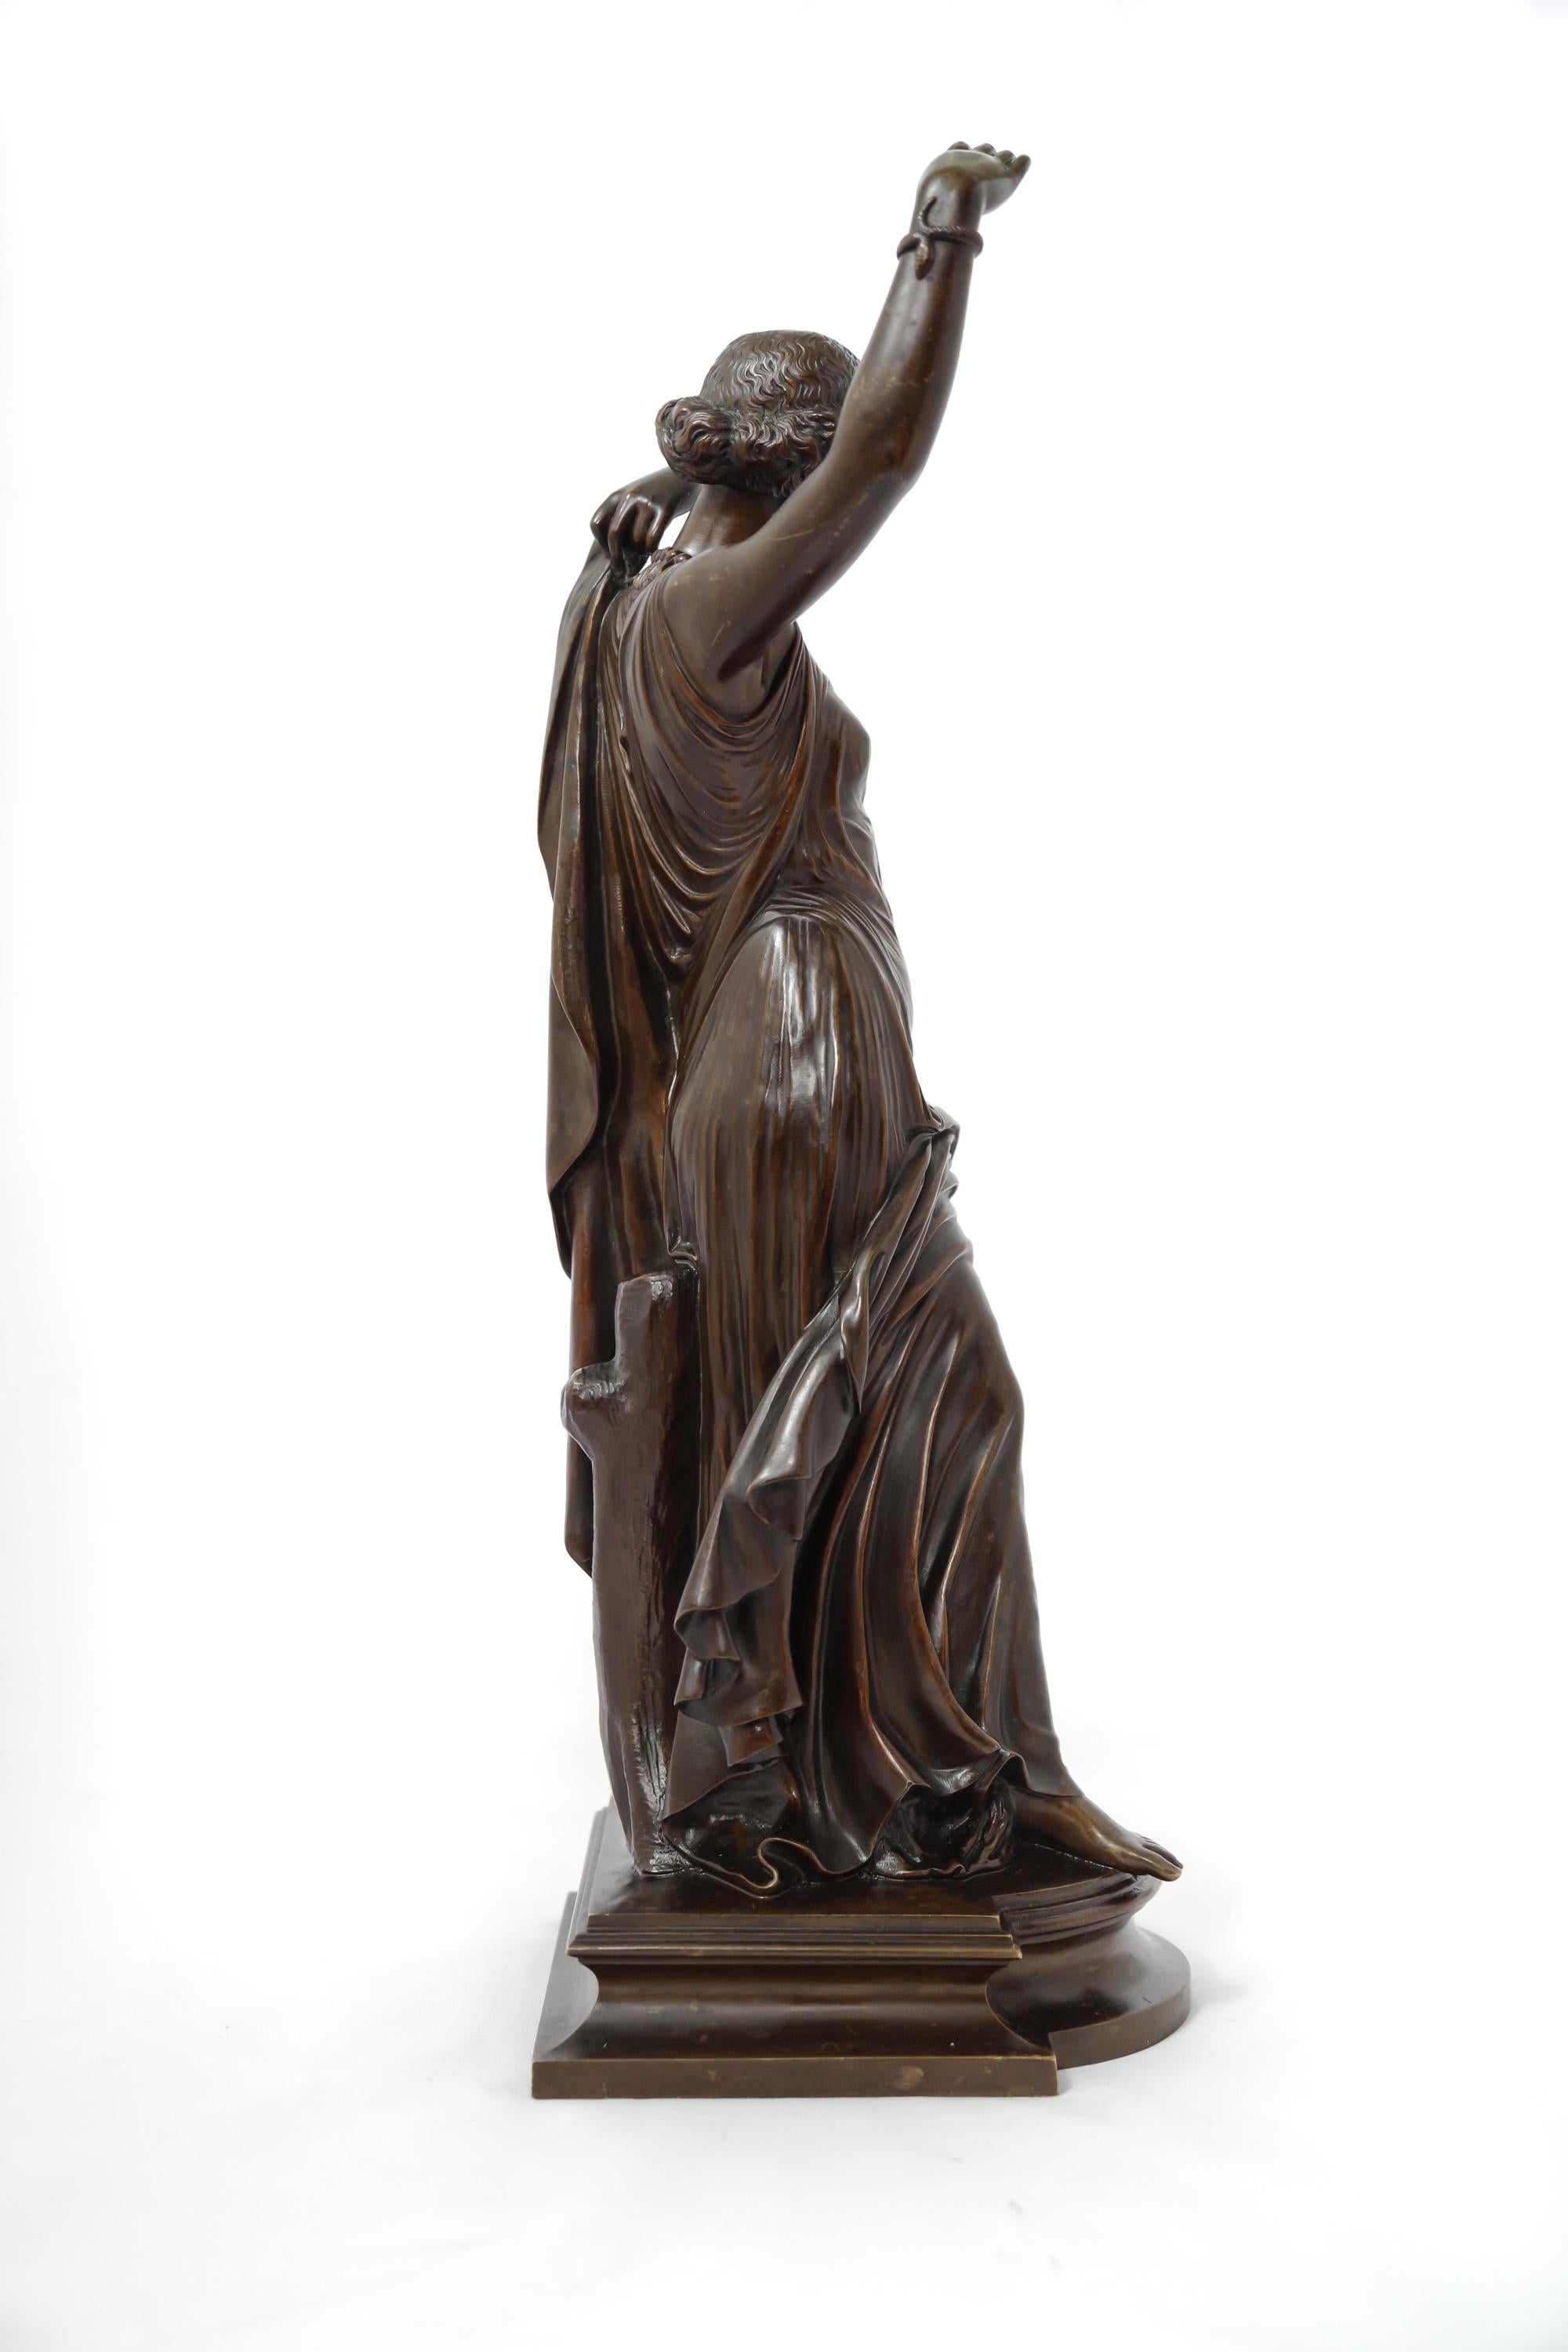 A mahogany/dark-chocolate-patinated bronze from one of the finest foundries of 19th-century, Siot-Decauville. The sculptor James Pradier (1790-1852), who commenced his career with works in the Neoclassical style, but then transitioned to more